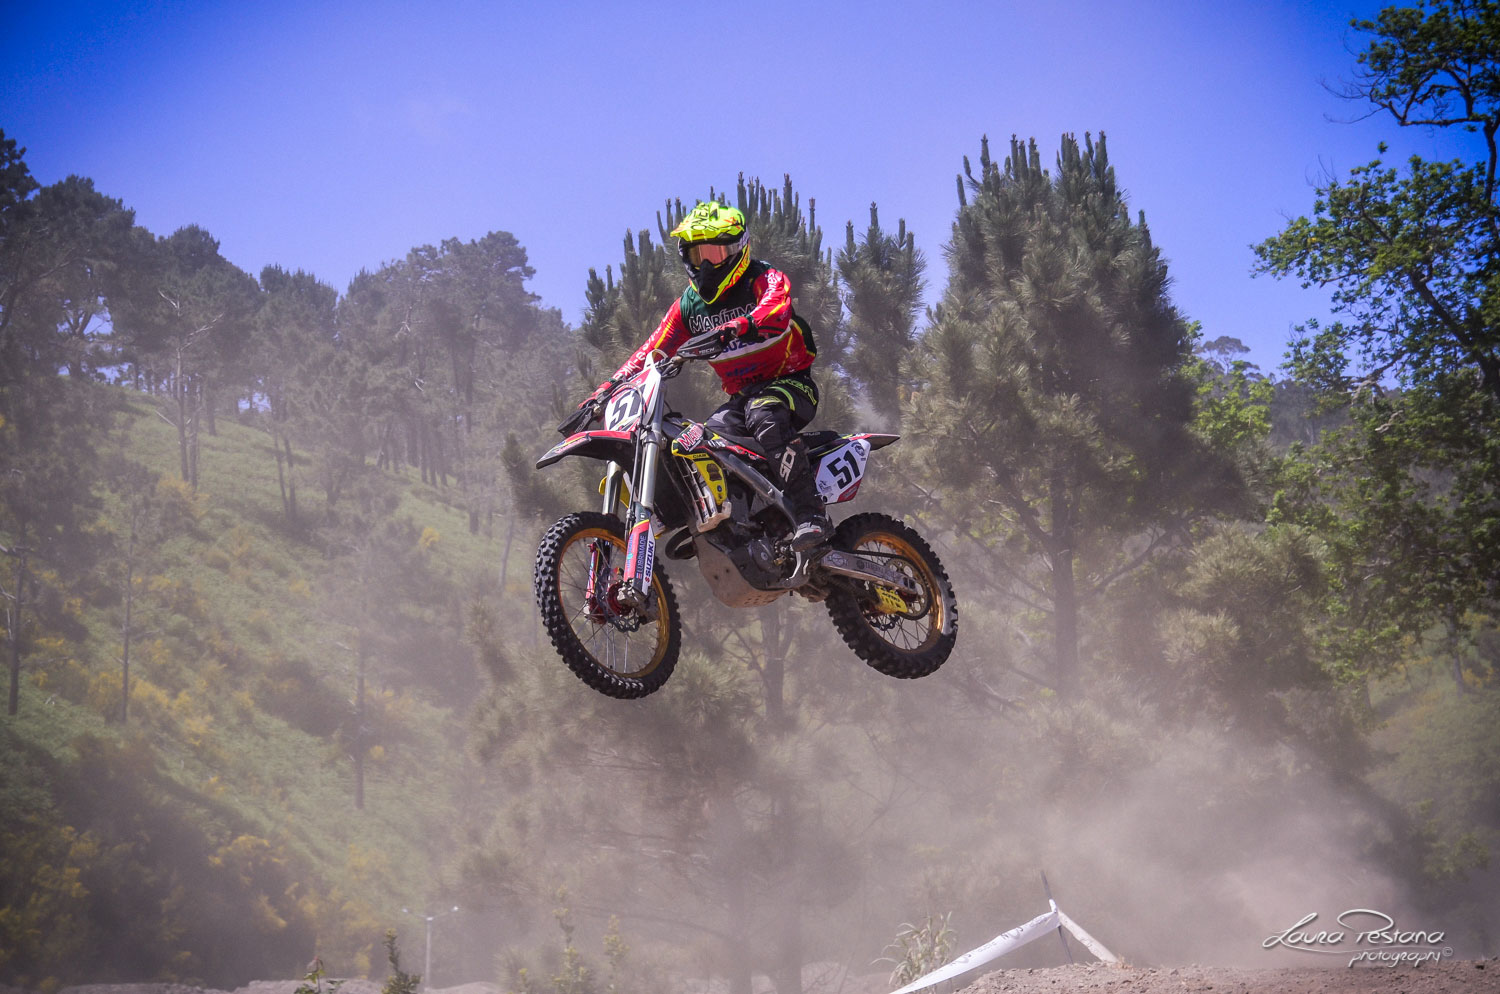 A rider jumping a double on his Suzuki RMZ 450